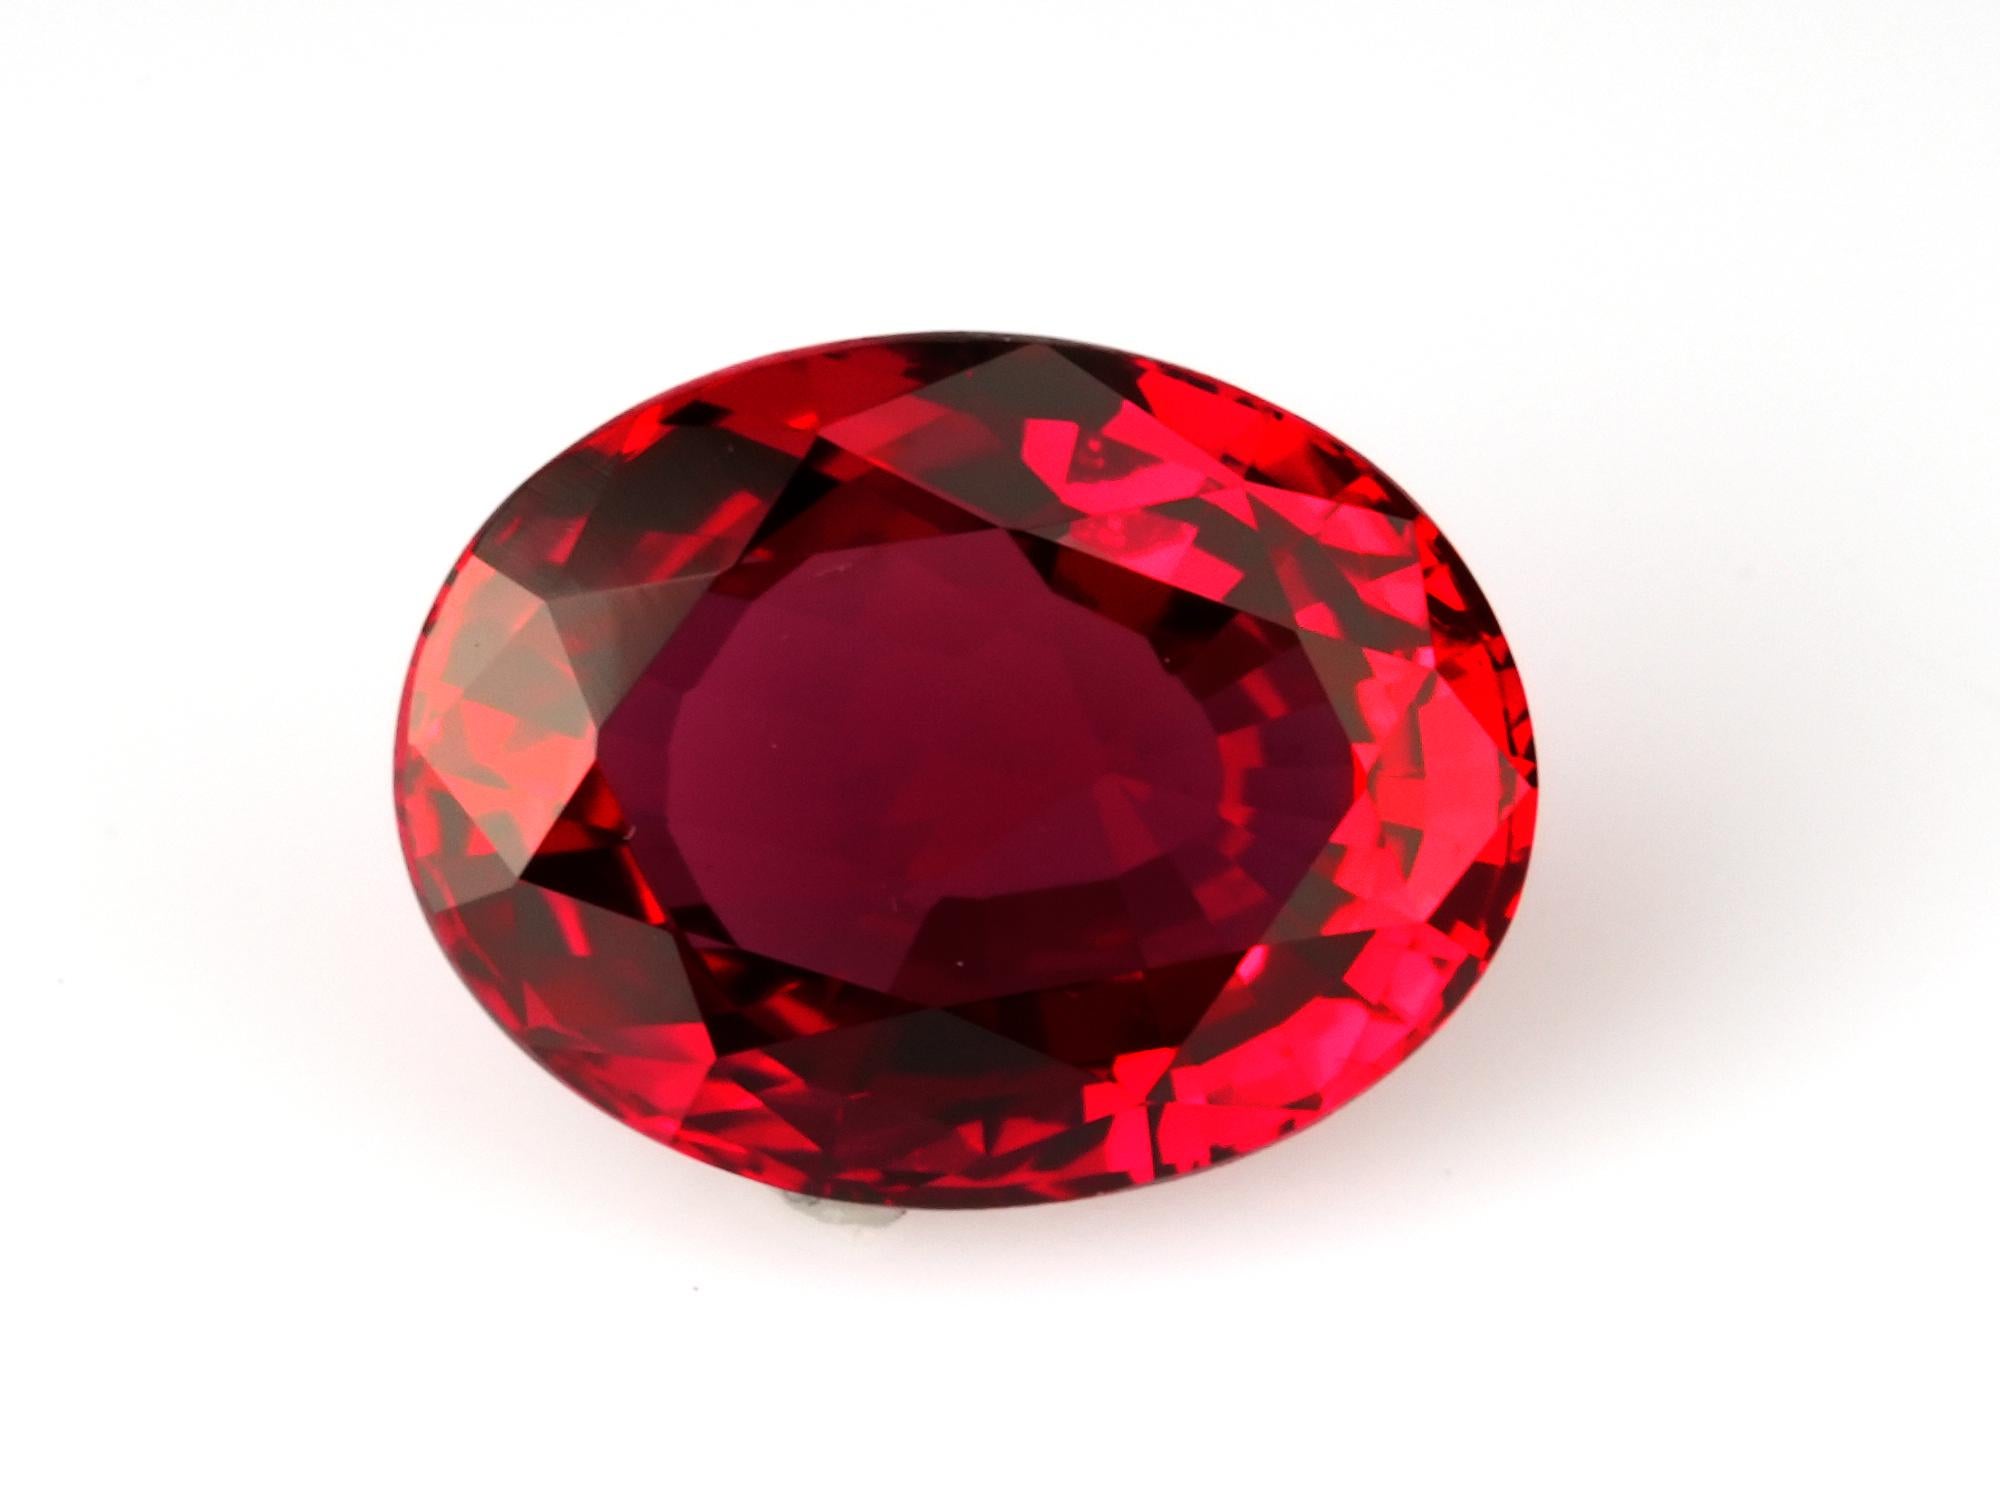 Ruby
Oval Shape
Color Red
Brilliant/Step Cut
Dimension 5.02x6.52x2.90
Weight 0.883 cts.
Country of Origin Mozambique

GEM RARITY: UNEARTHLY THE RAREST GEM

Witness the unique journey of colored gemstones, experience a new level of iconic statements